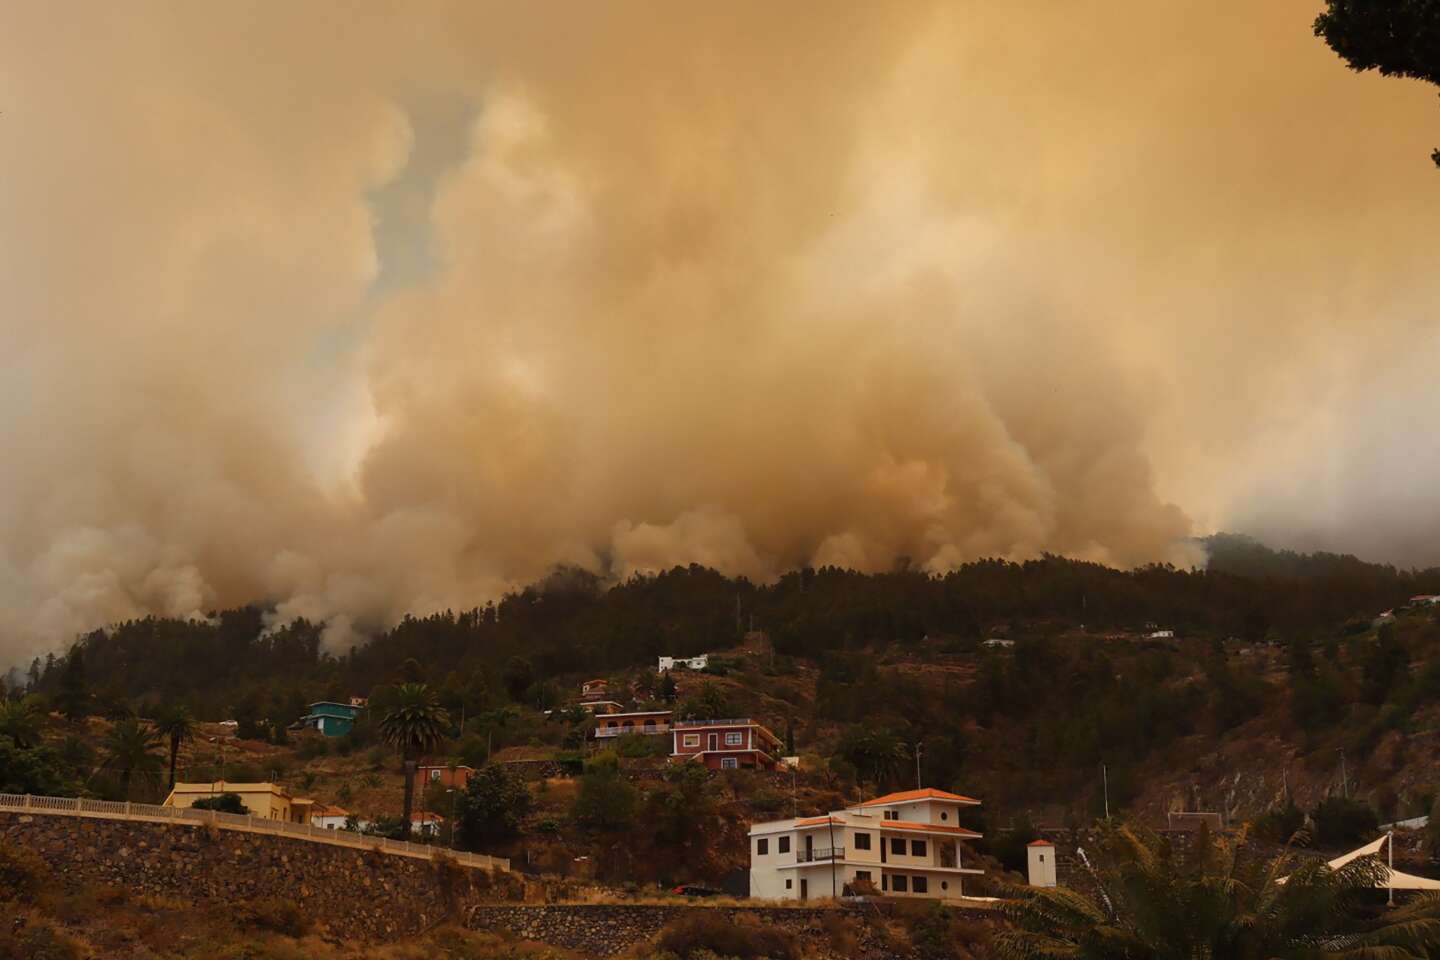 5,000 hectares destroyed in Spanish archipelago of Canaries, firefighters helped by plummeting temperatures